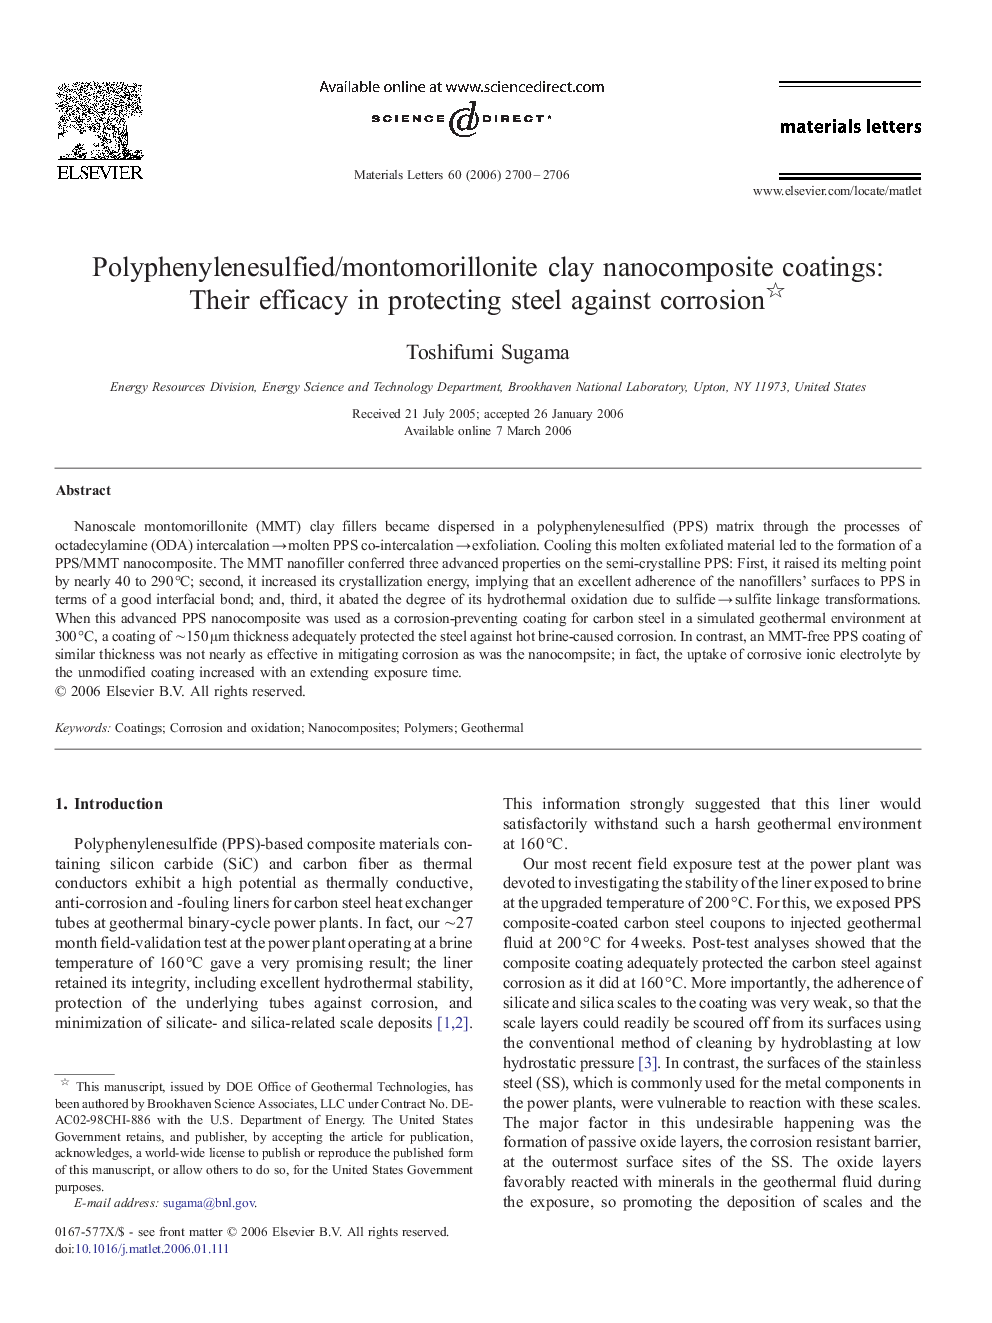 Polyphenylenesulfied/montomorillonite clay nanocomposite coatings: Their efficacy in protecting steel against corrosion 